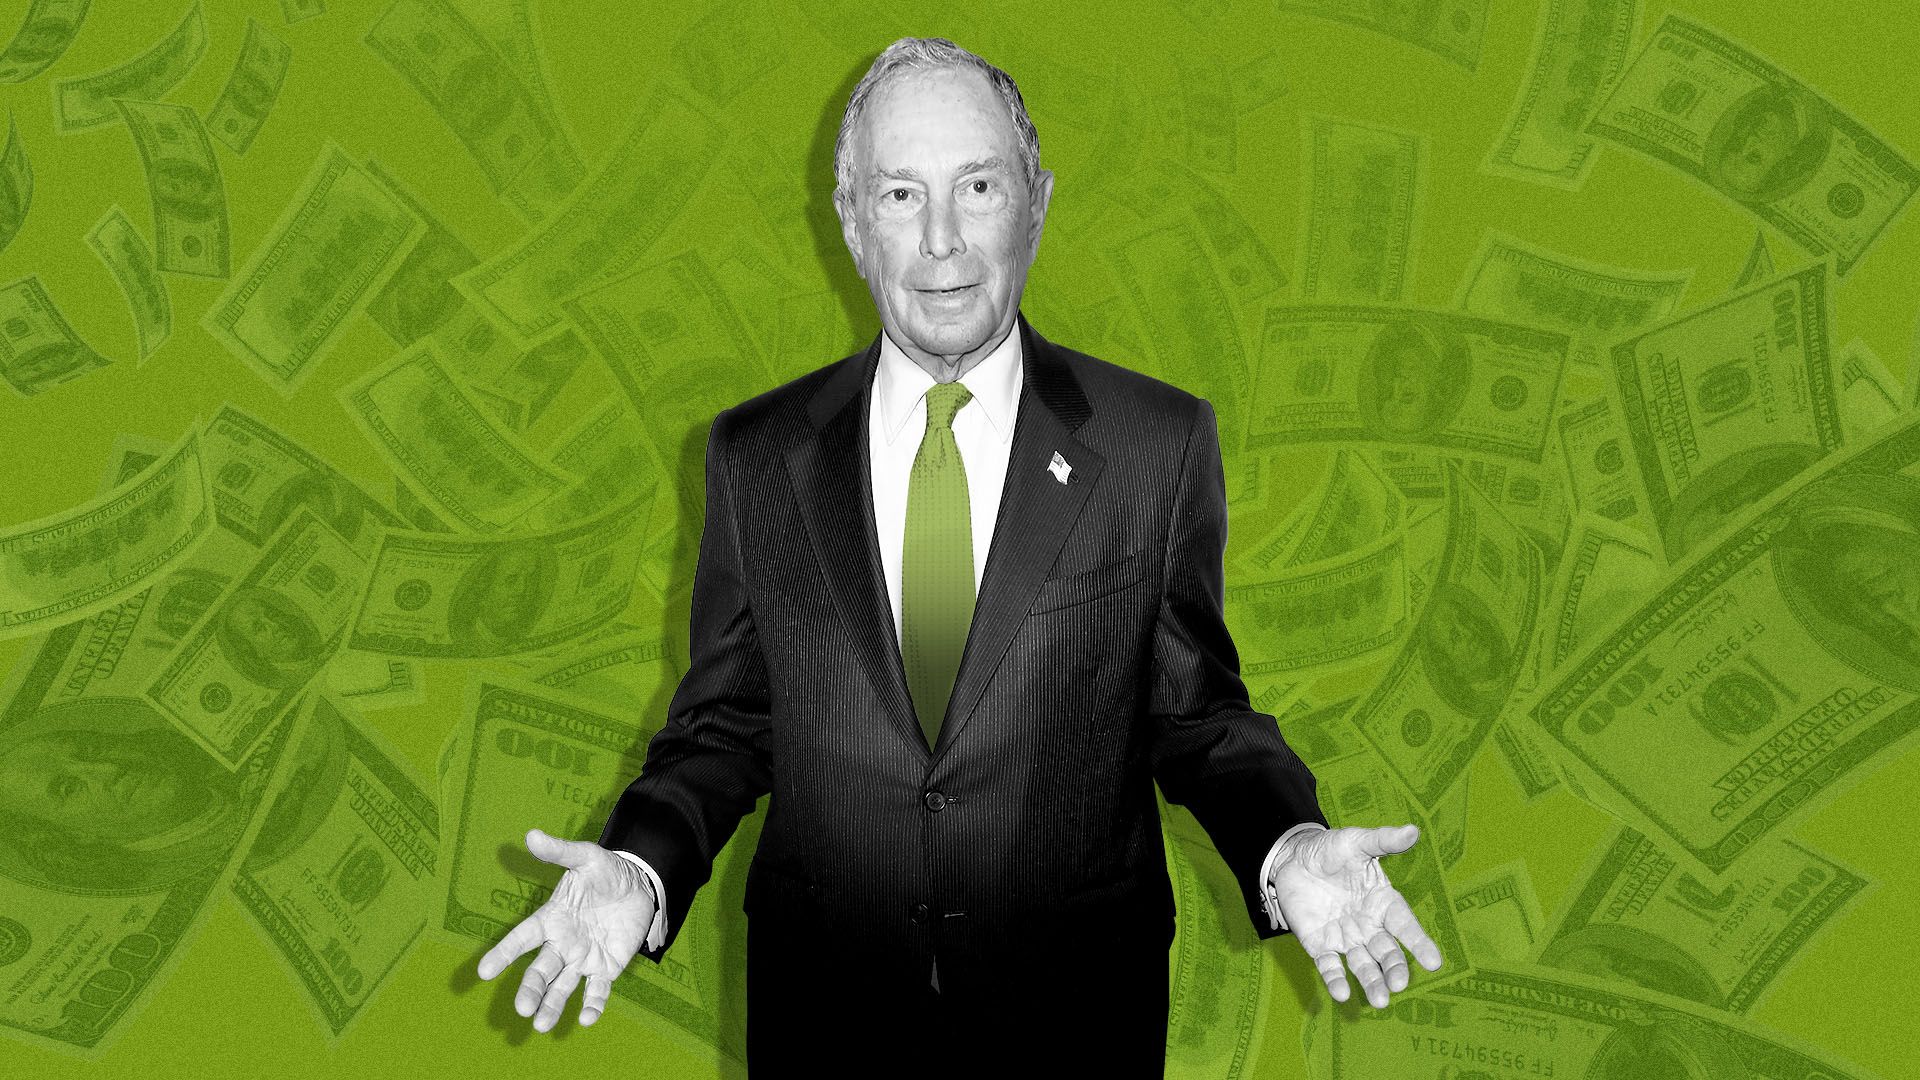 In this illustration, Bloomberg stands behind a wall of money